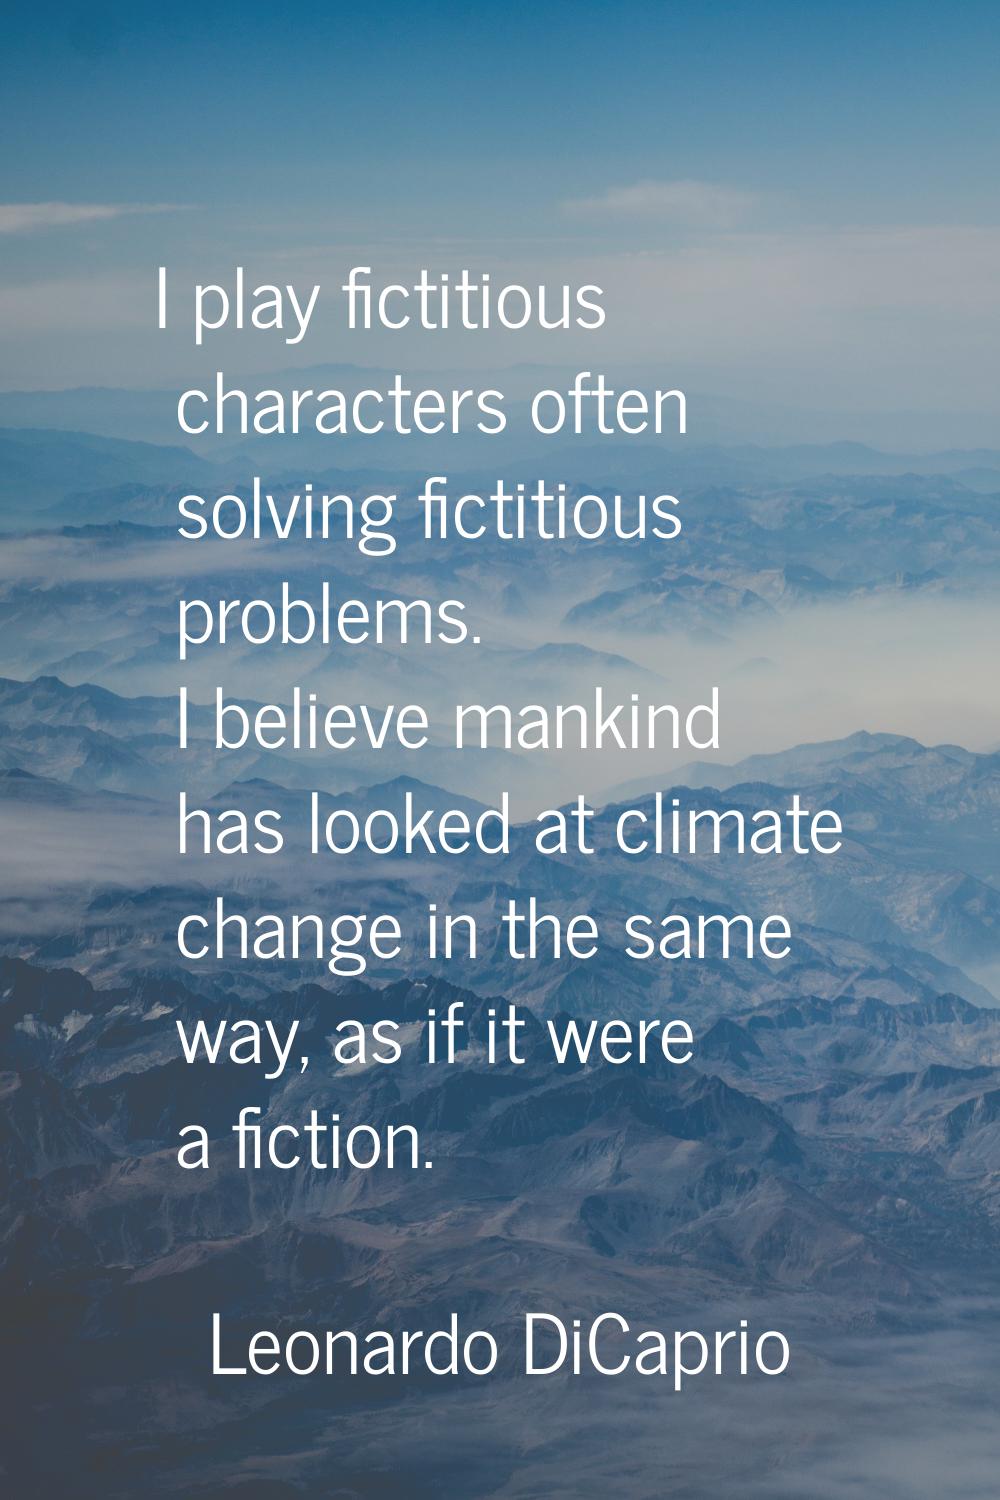 I play fictitious characters often solving fictitious problems. I believe mankind has looked at cli